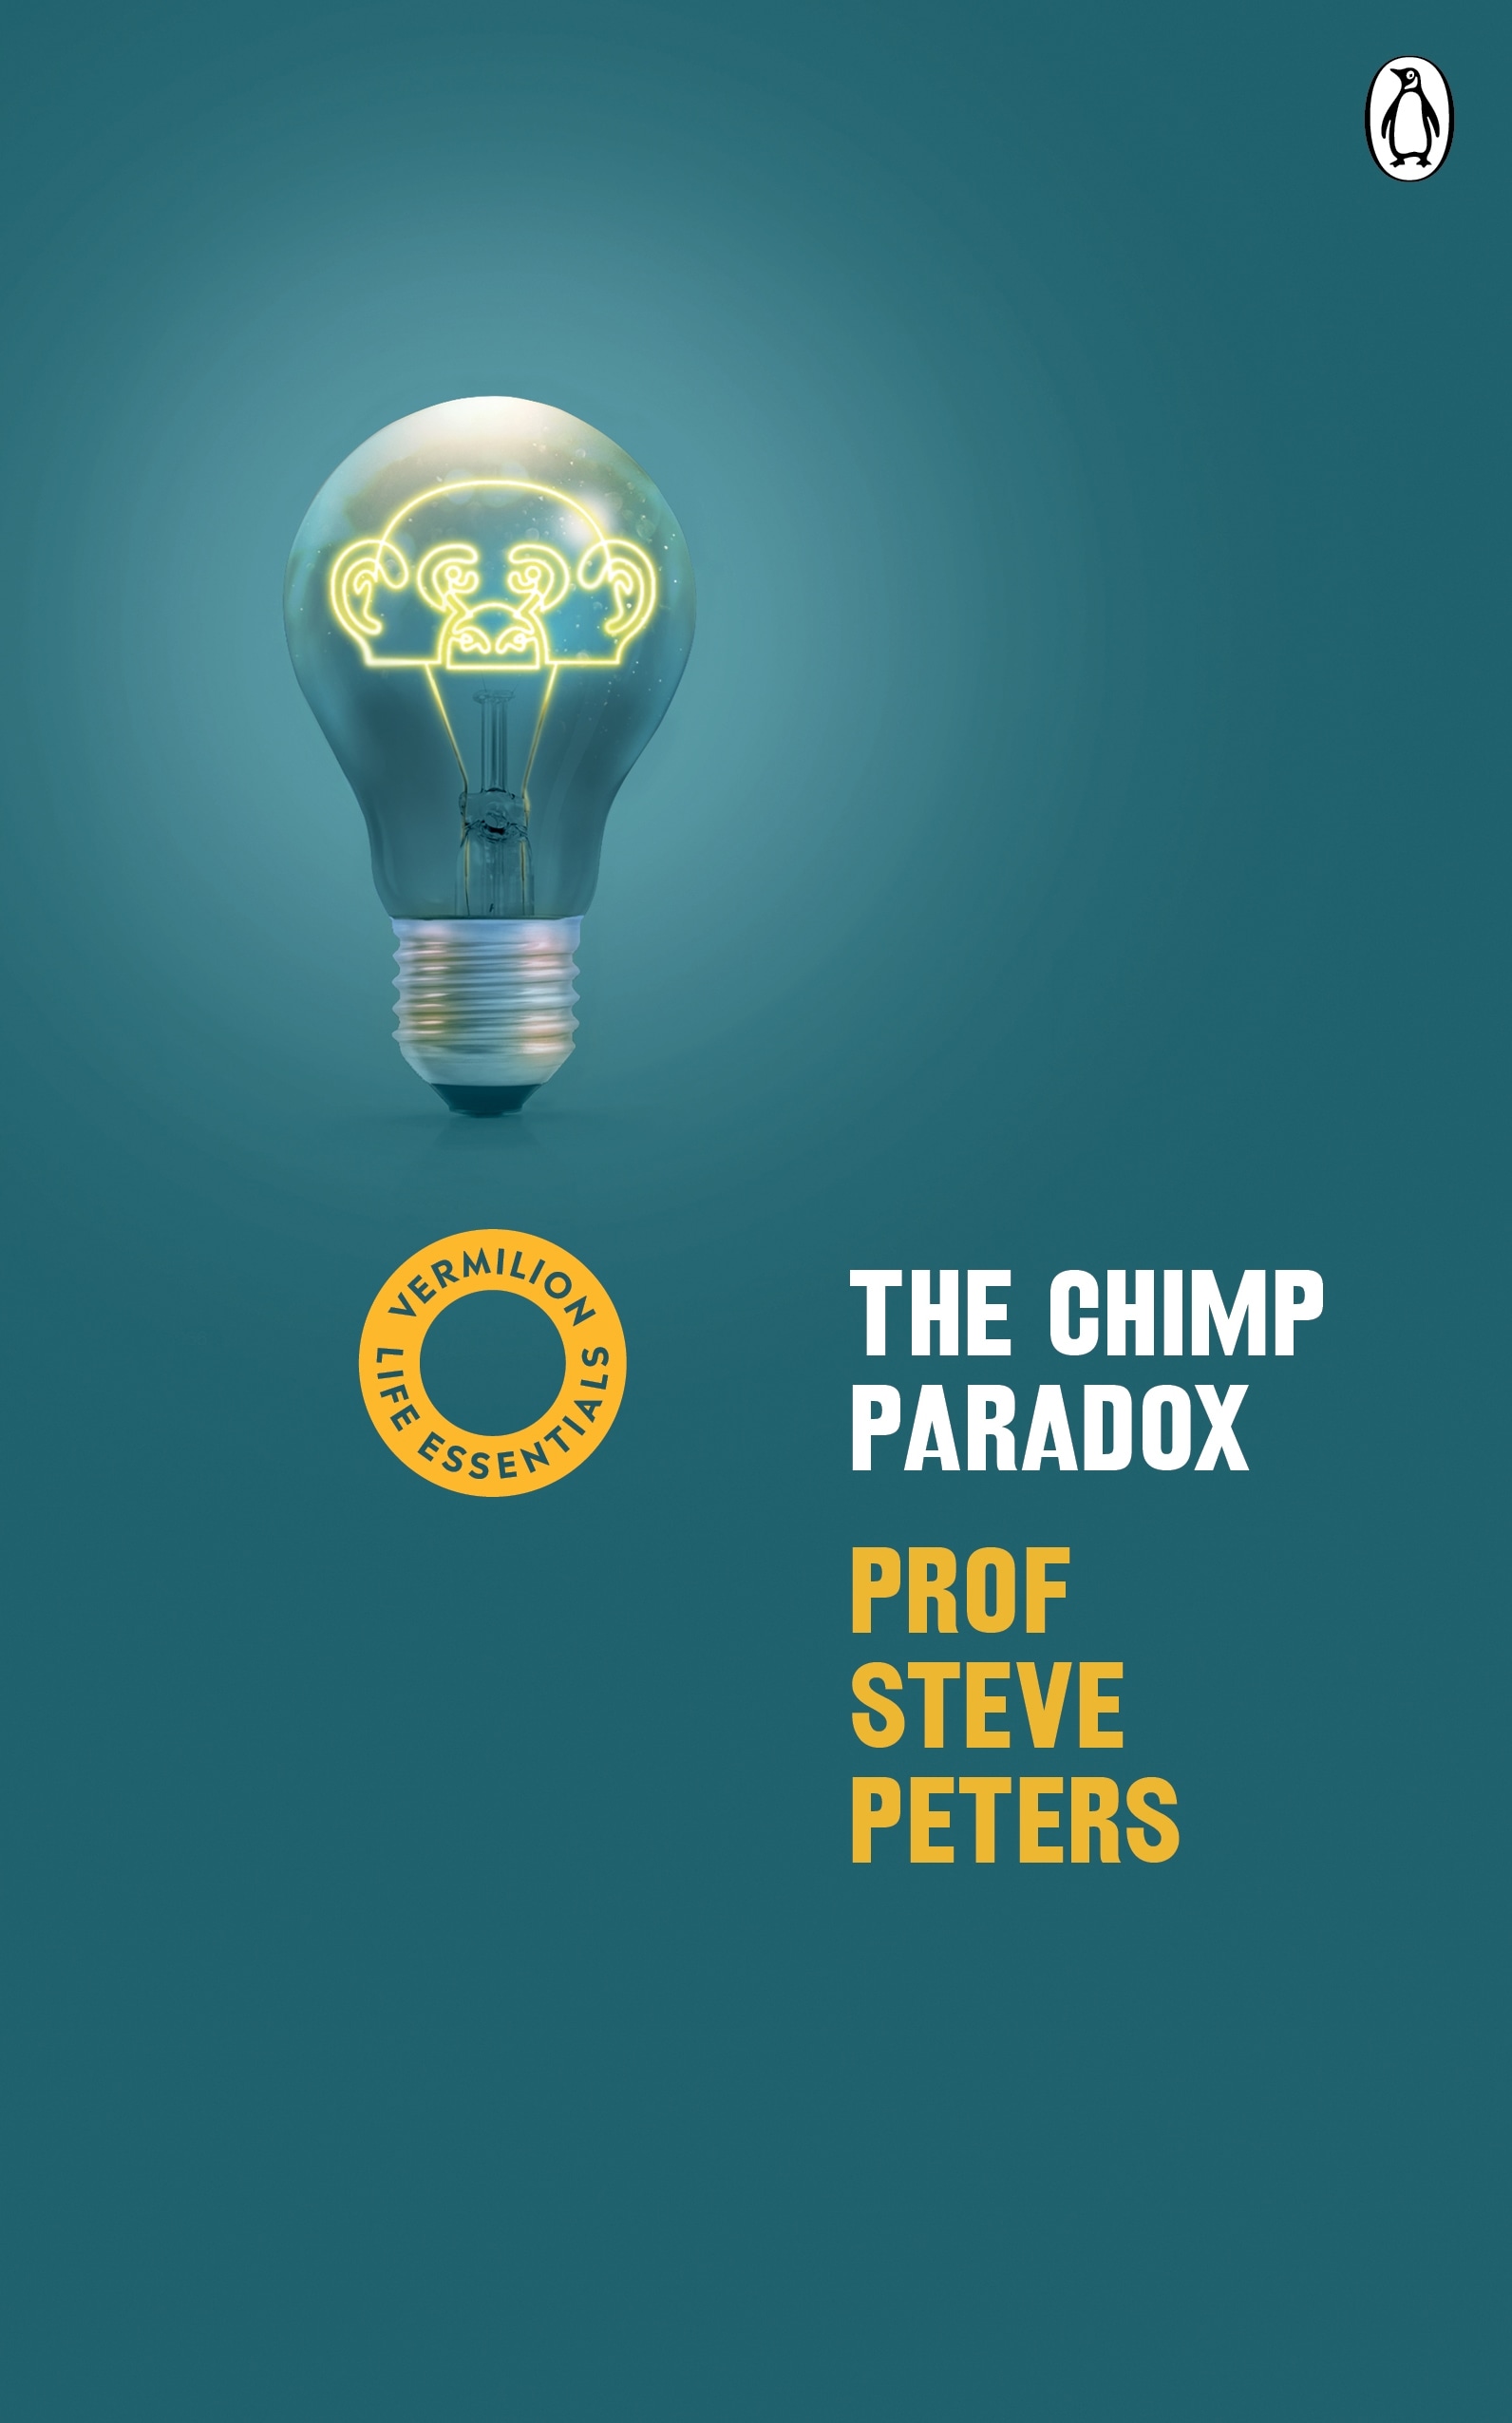 Book “The Chimp Paradox” by Prof Steve Peters — August 20, 2020